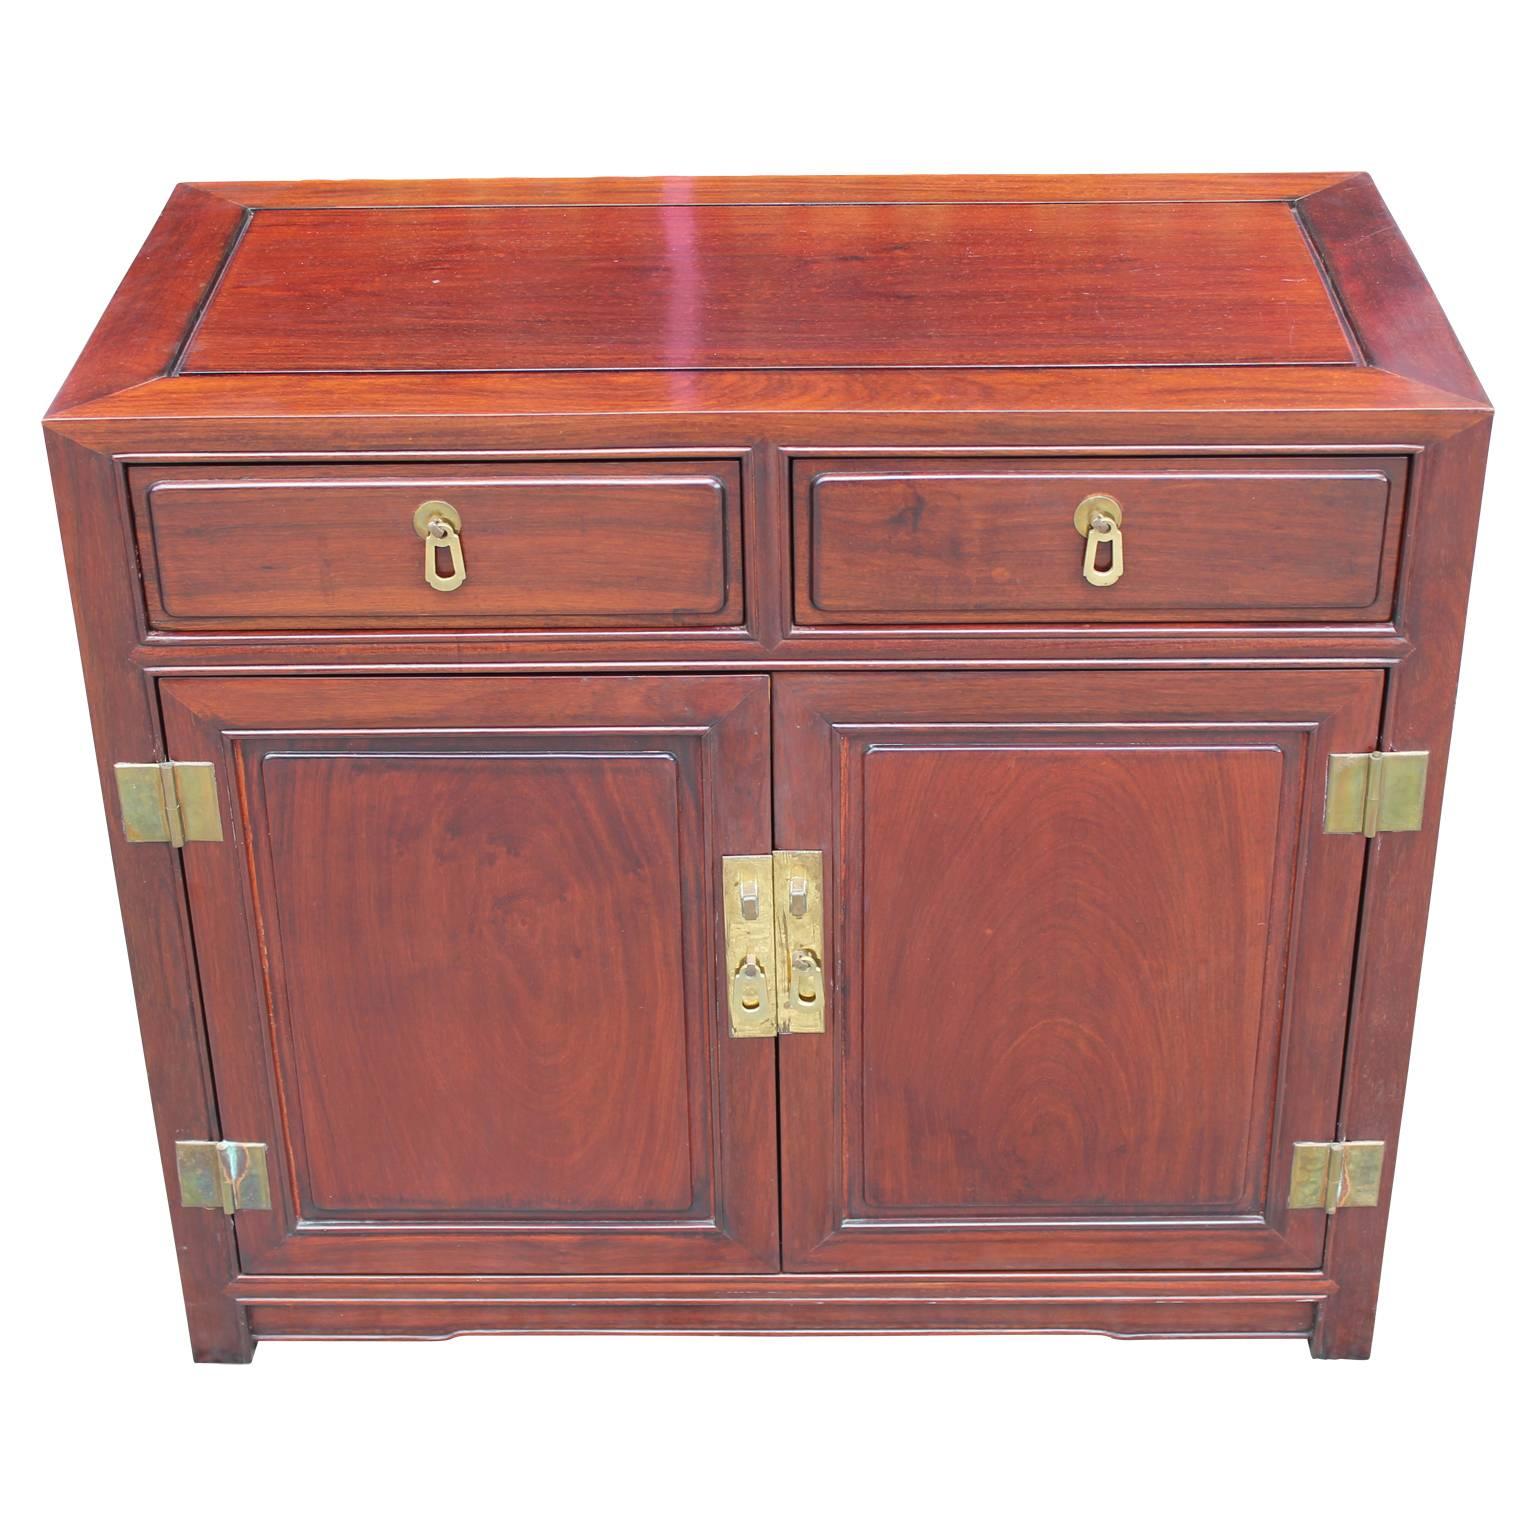 Beautiful Mid-Century Modern small sized chest or cabinet made out of mahogany and fashioned with brass hardware that has a nice patina. In the style of Henredon or Baker Furniture.